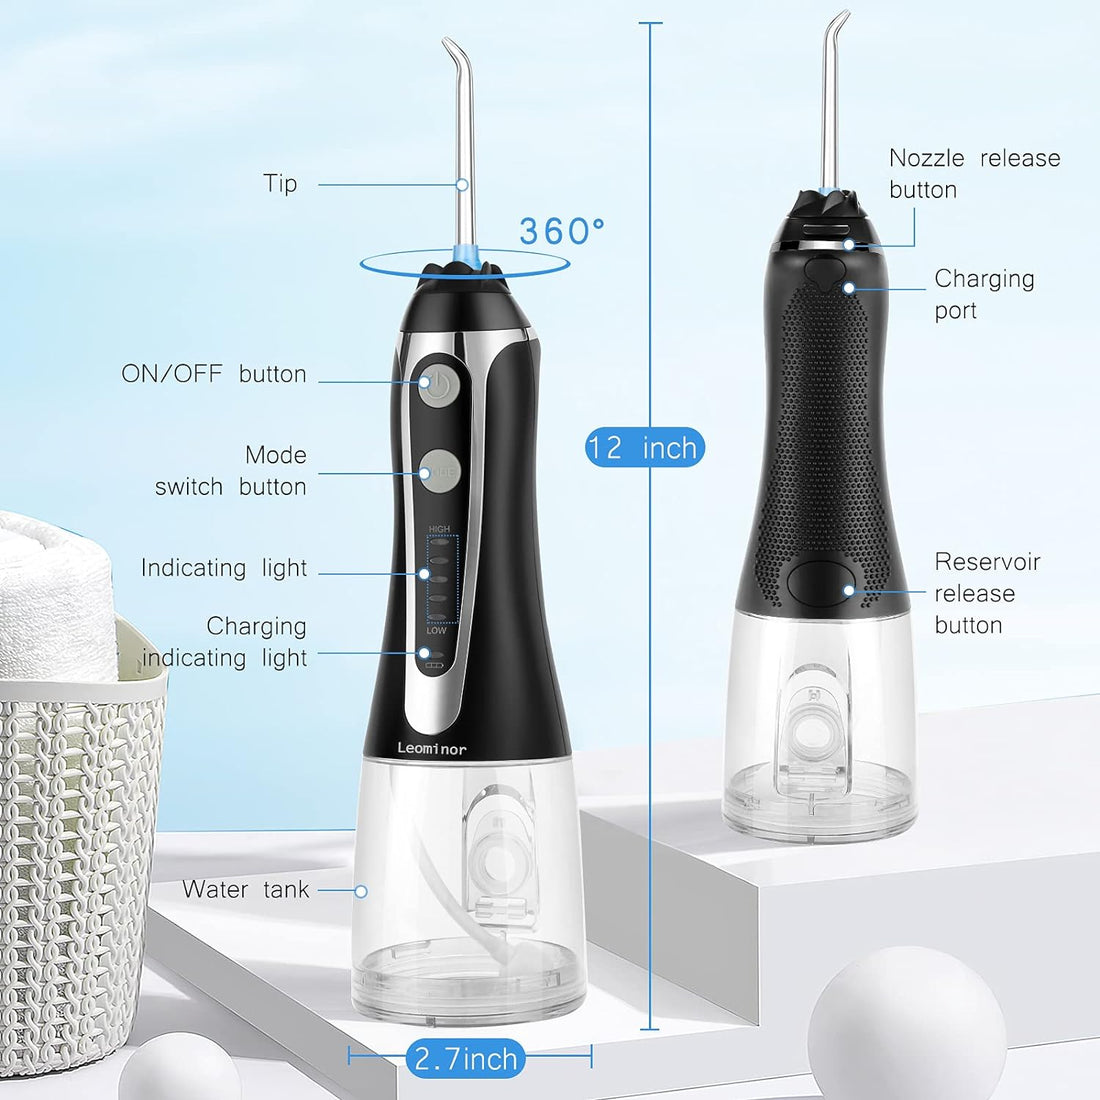 Cordless Water Flosser Professional Oral Irrigator,2021 Upgraded Electric Dental Flosser IPX7 Waterproof,with Travel Bag and 7 Jet Tips, Rechargeable for Home&Travel